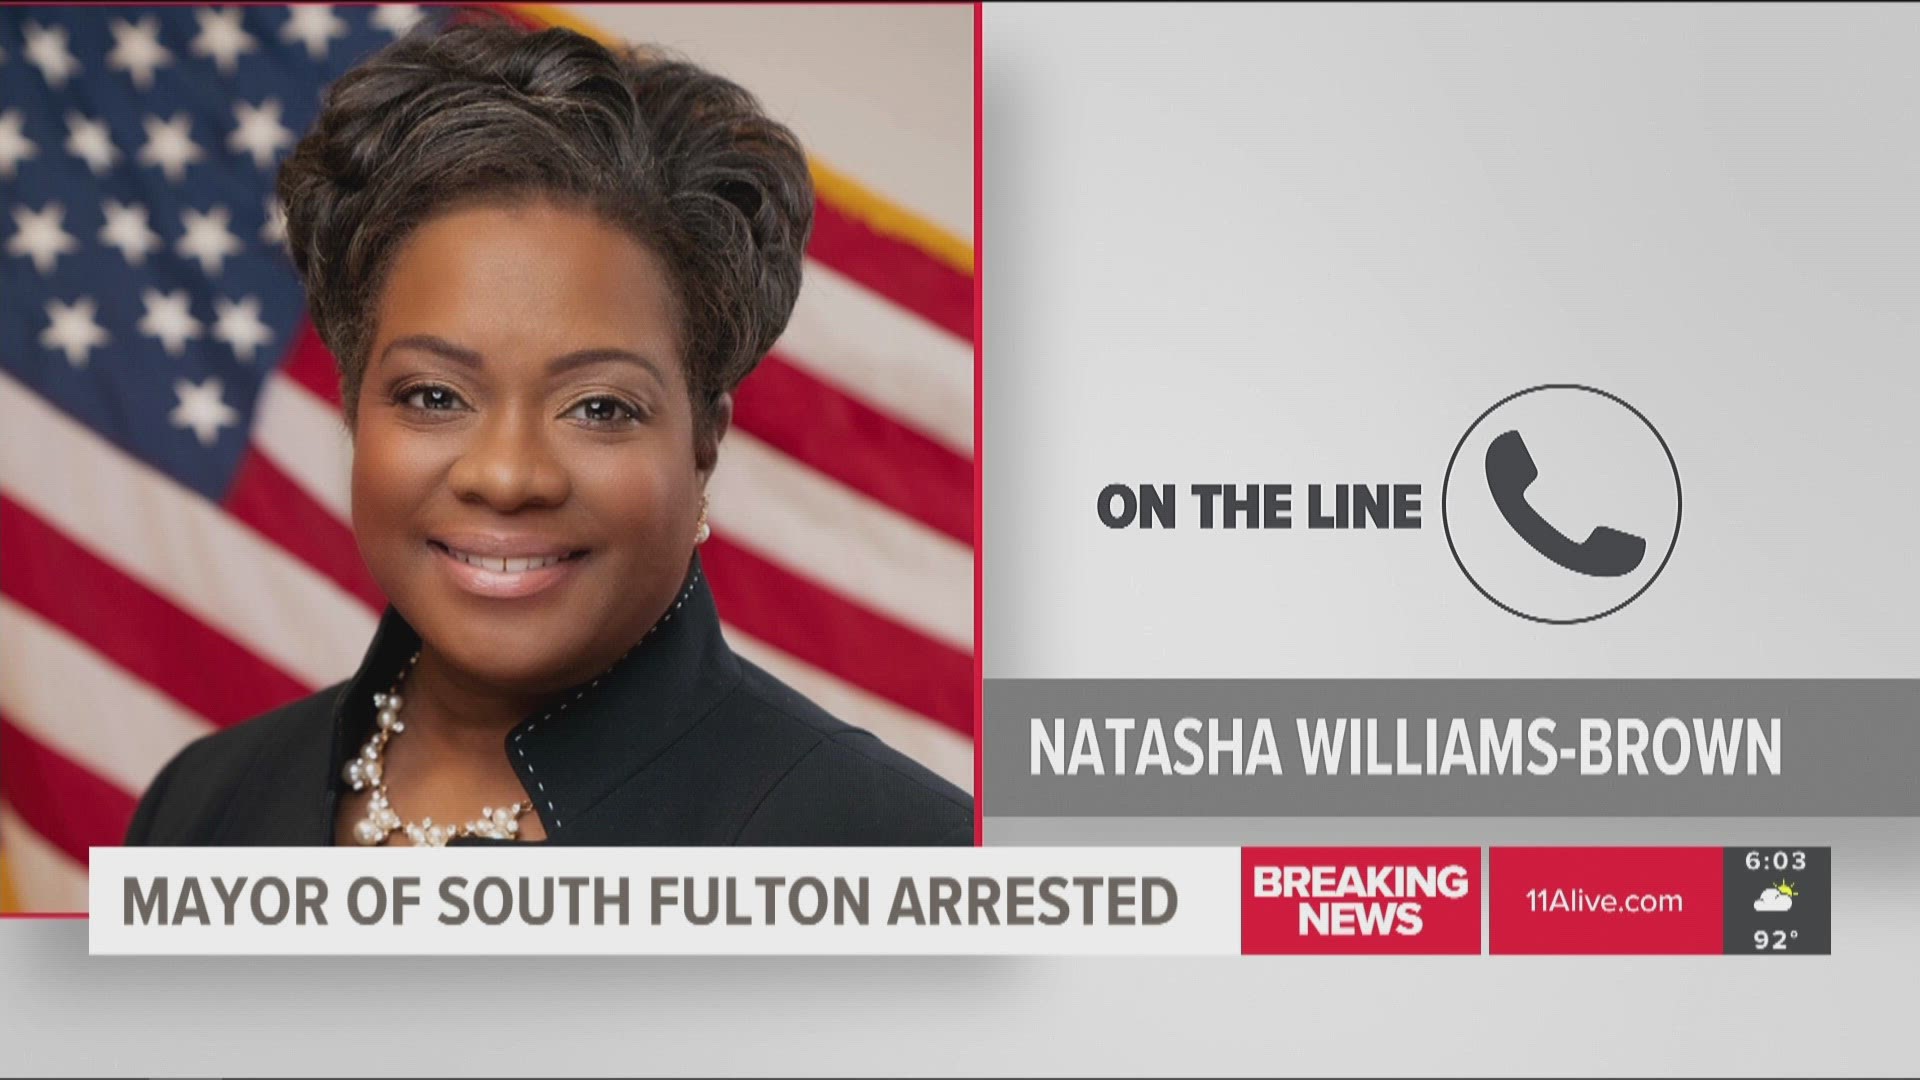 District 6 Councilwoman Natasha Williams-Brown will now serve as the acting mayor of the City of South Fulton.